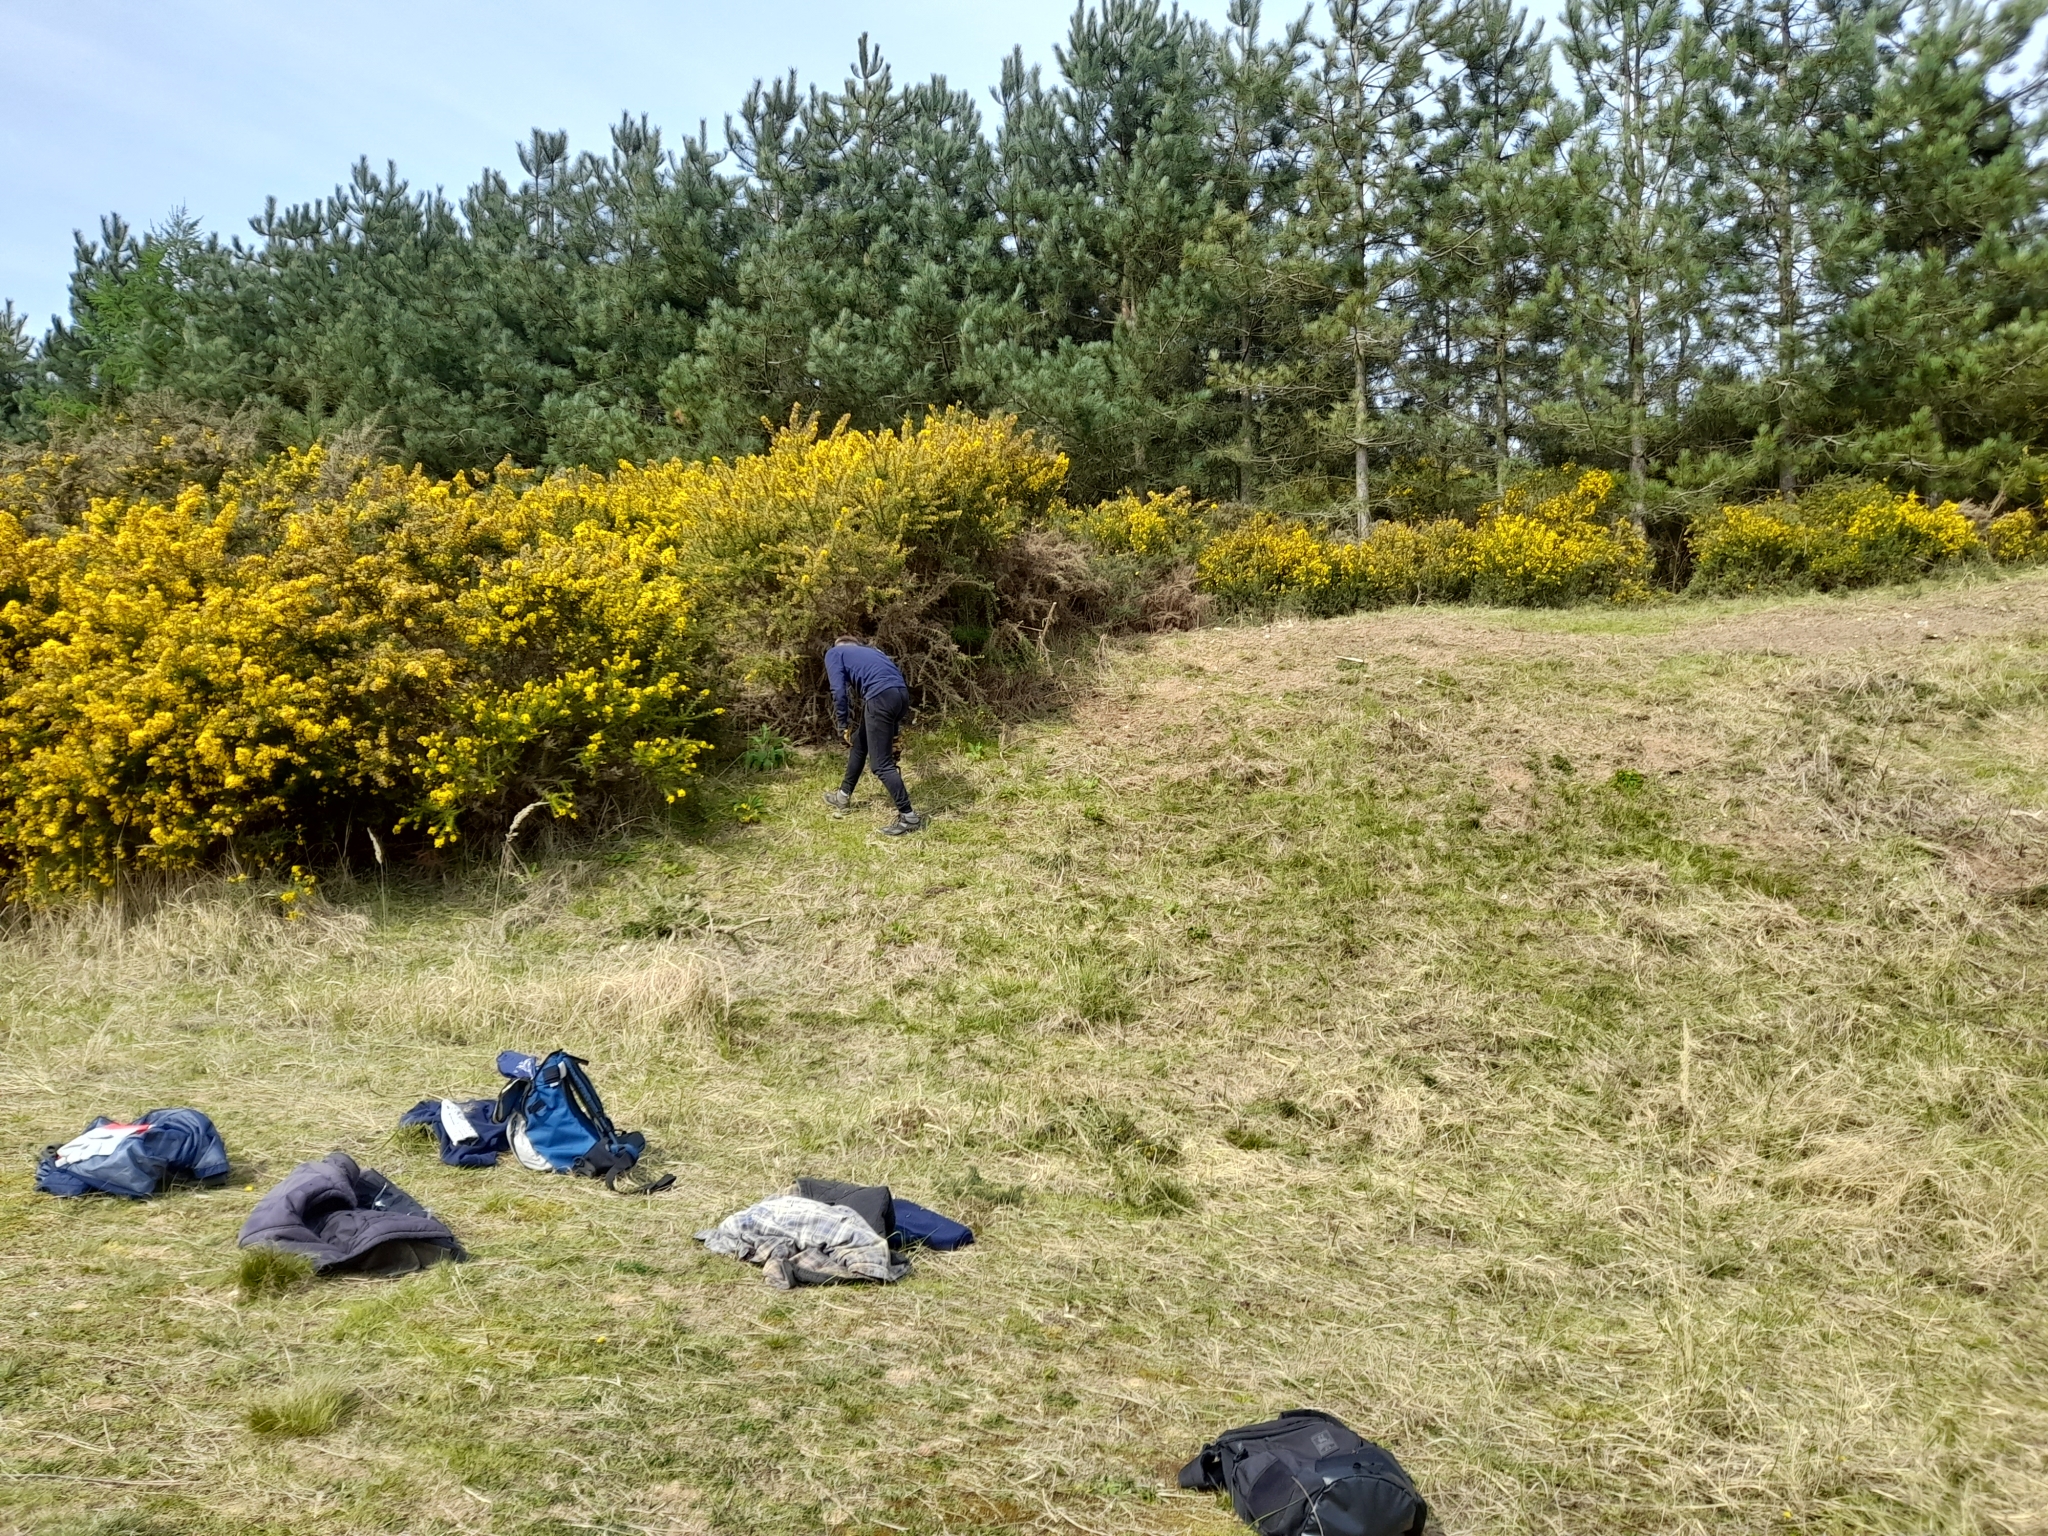 A photo from the FoTF Conservation Event - April 2022 - Scrub Clearance at Mildenhall Mugwort Pits : A volunteer works amongst the Gorse on the slope of the pit